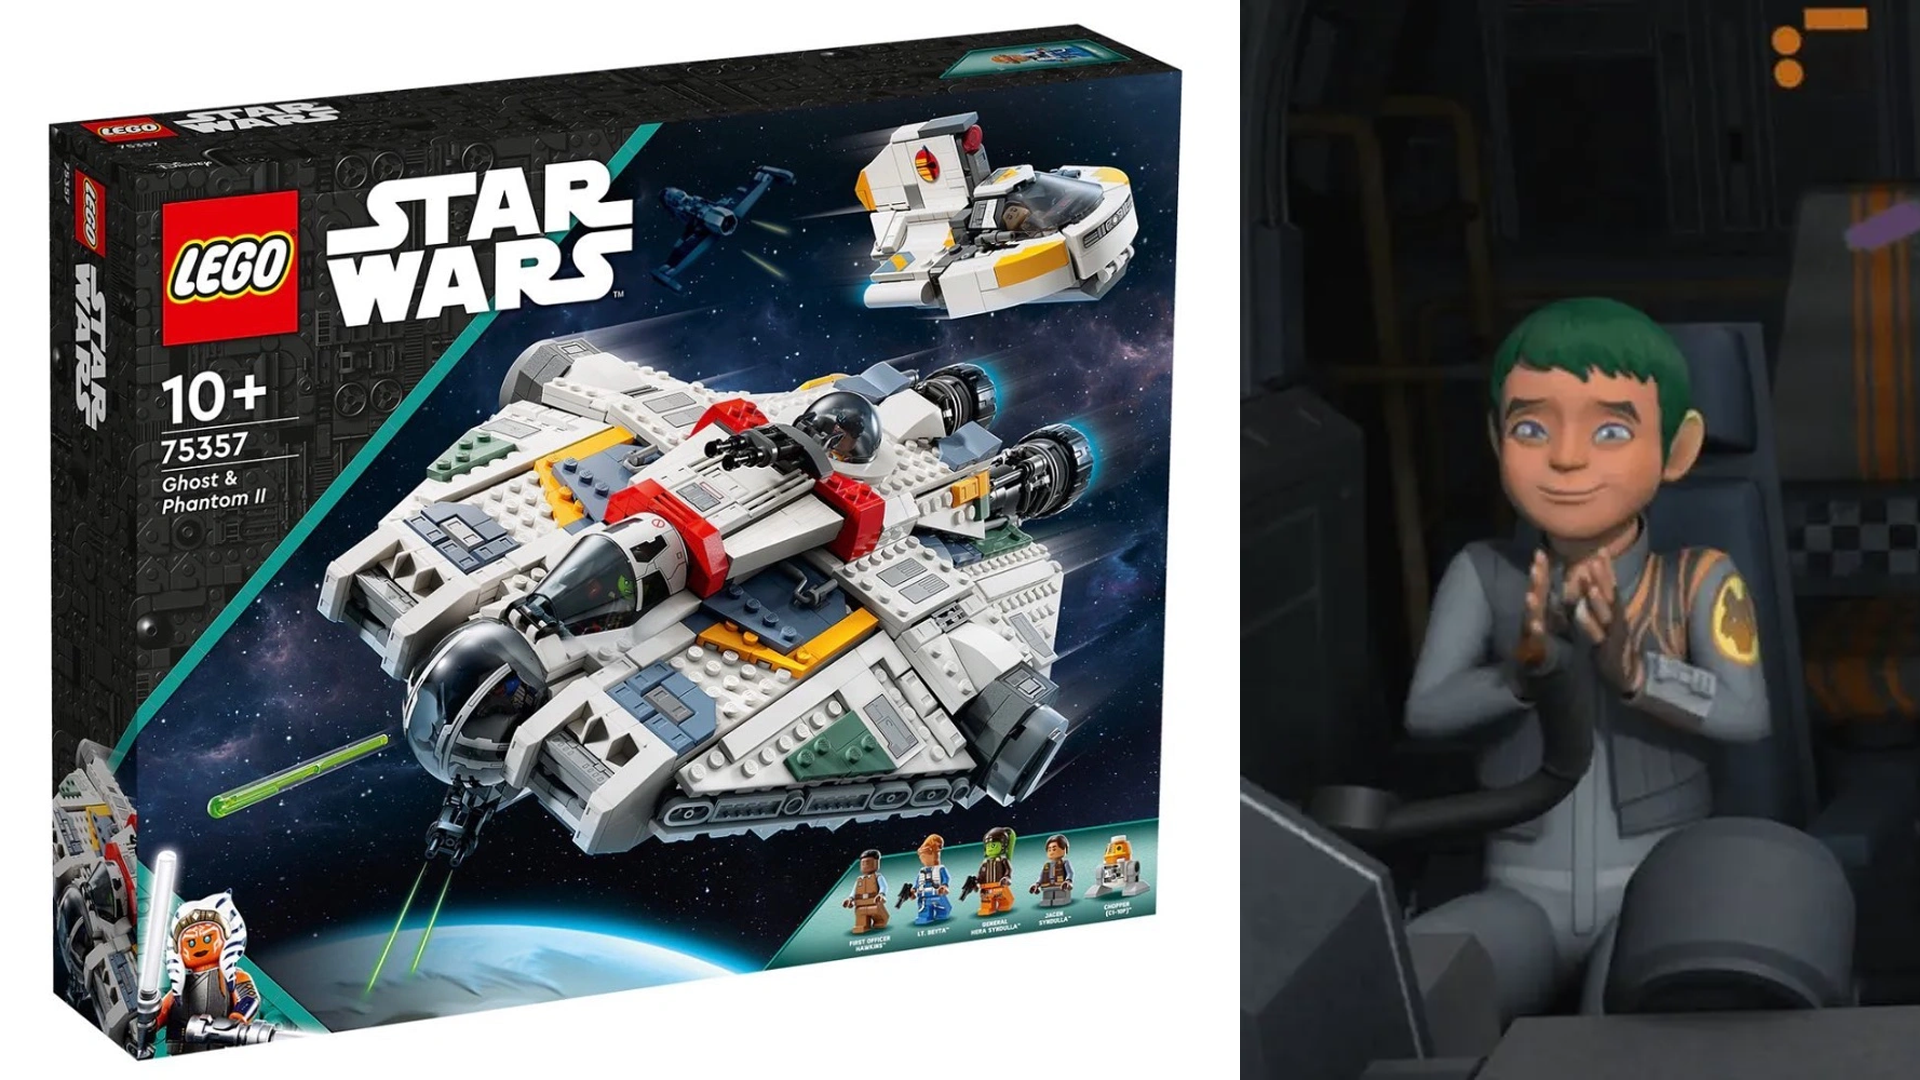 Lego Star Wars': All Playable Characters Revealed - Star Wars News Net